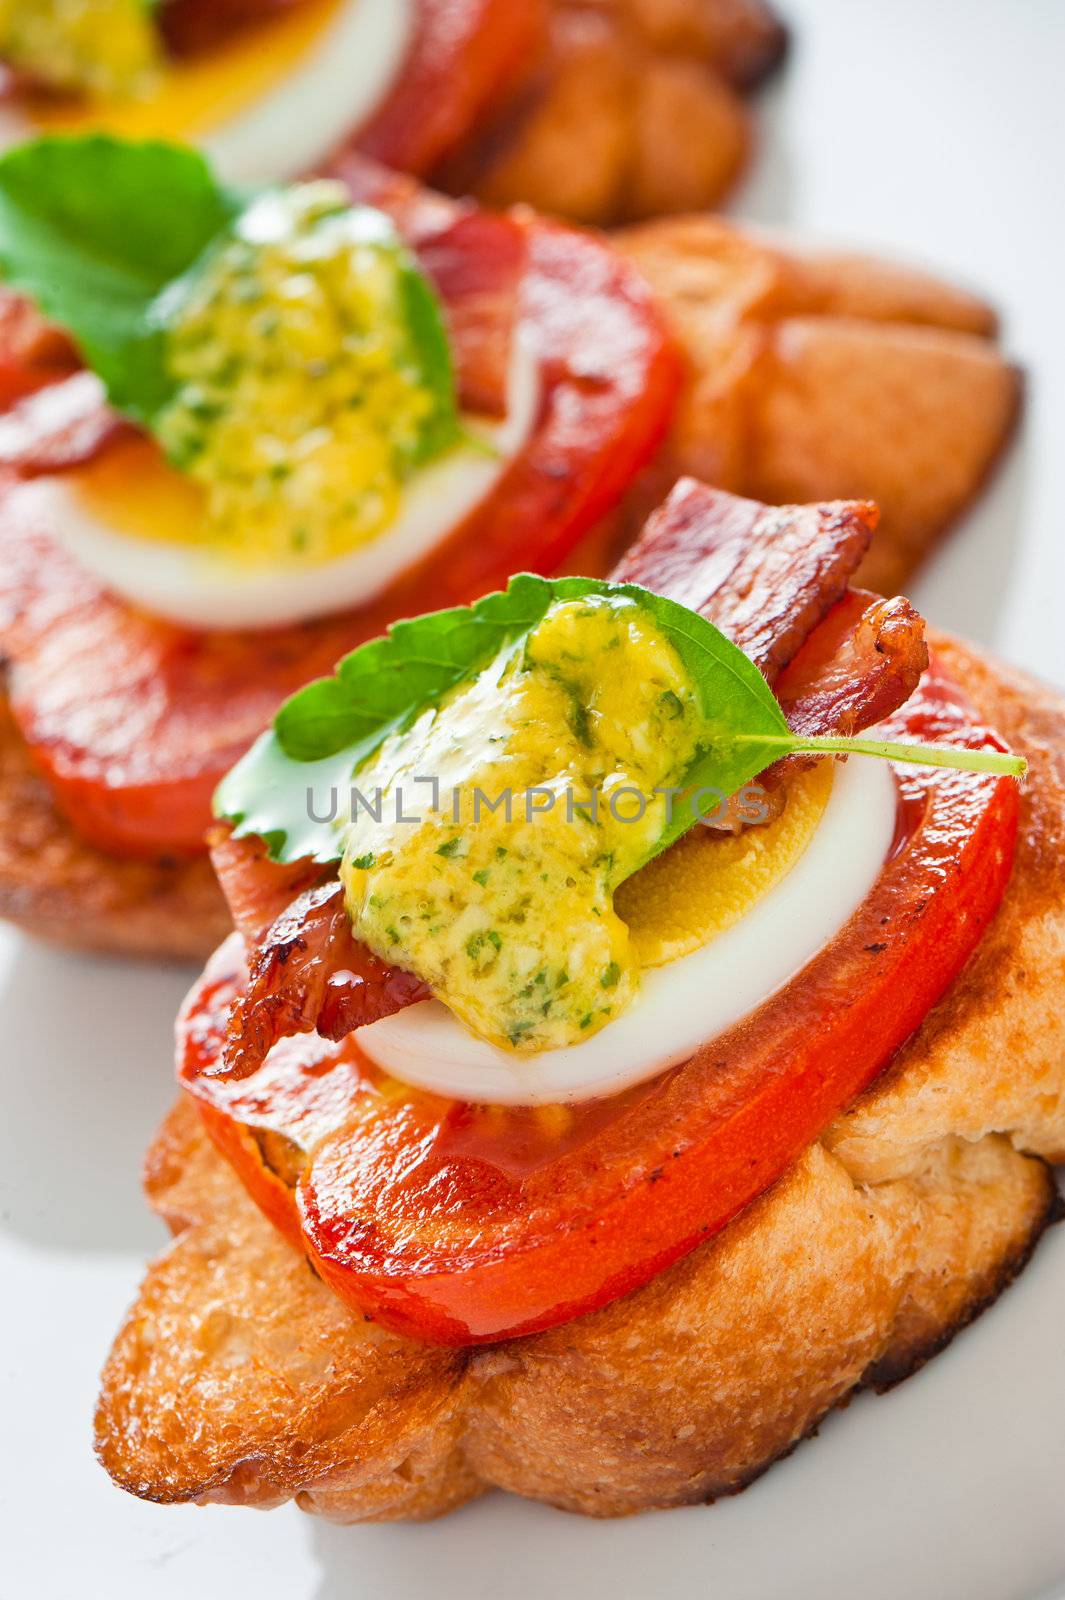 A baguette slice with tomato egg bacon and herb butter